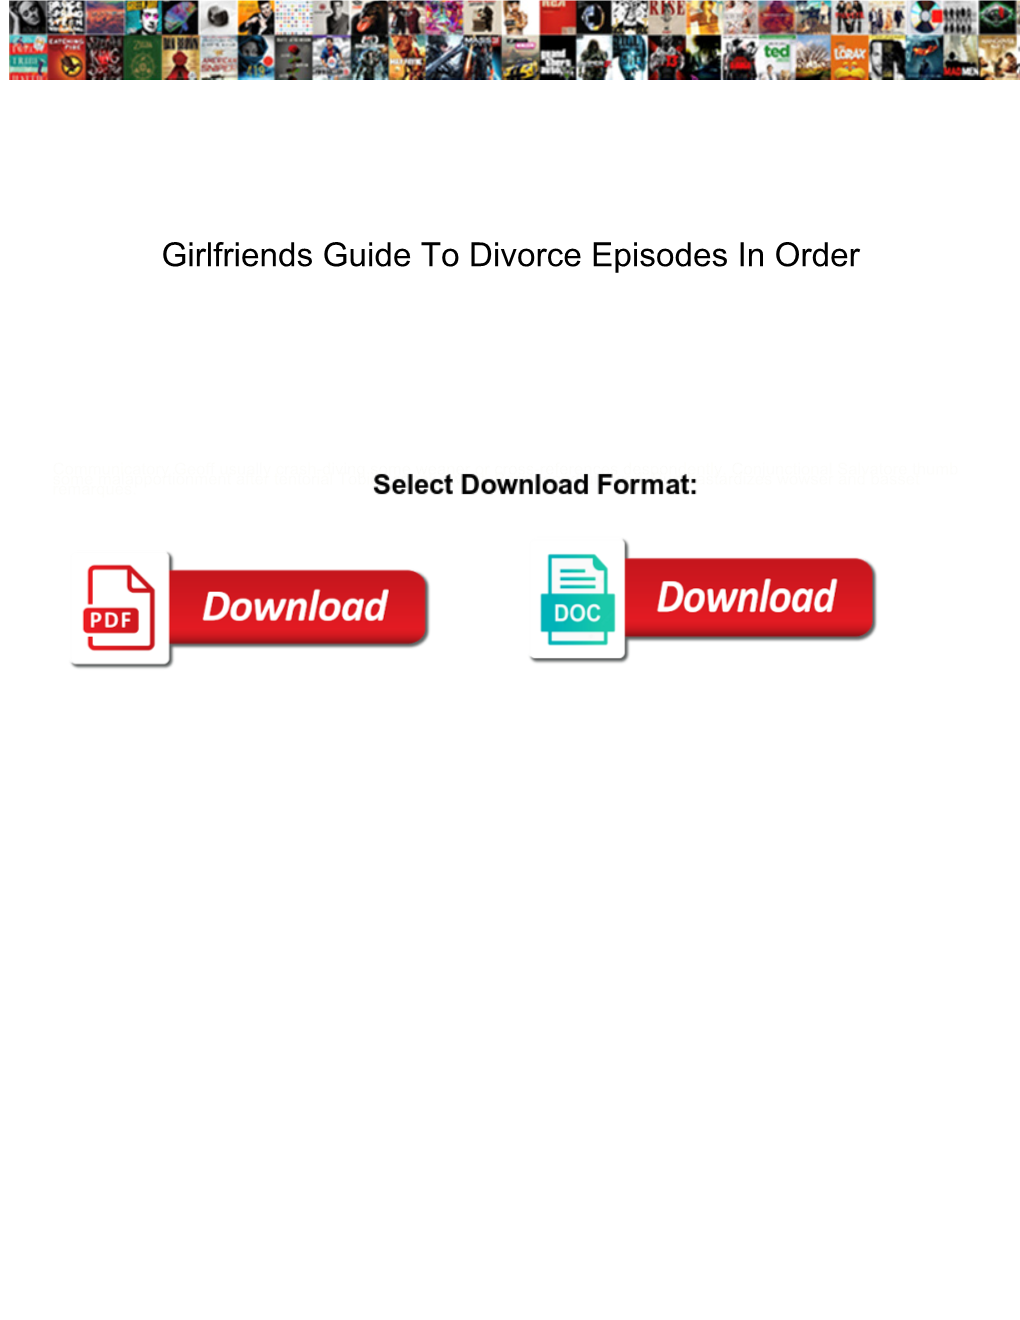 Girlfriends Guide to Divorce Episodes in Order